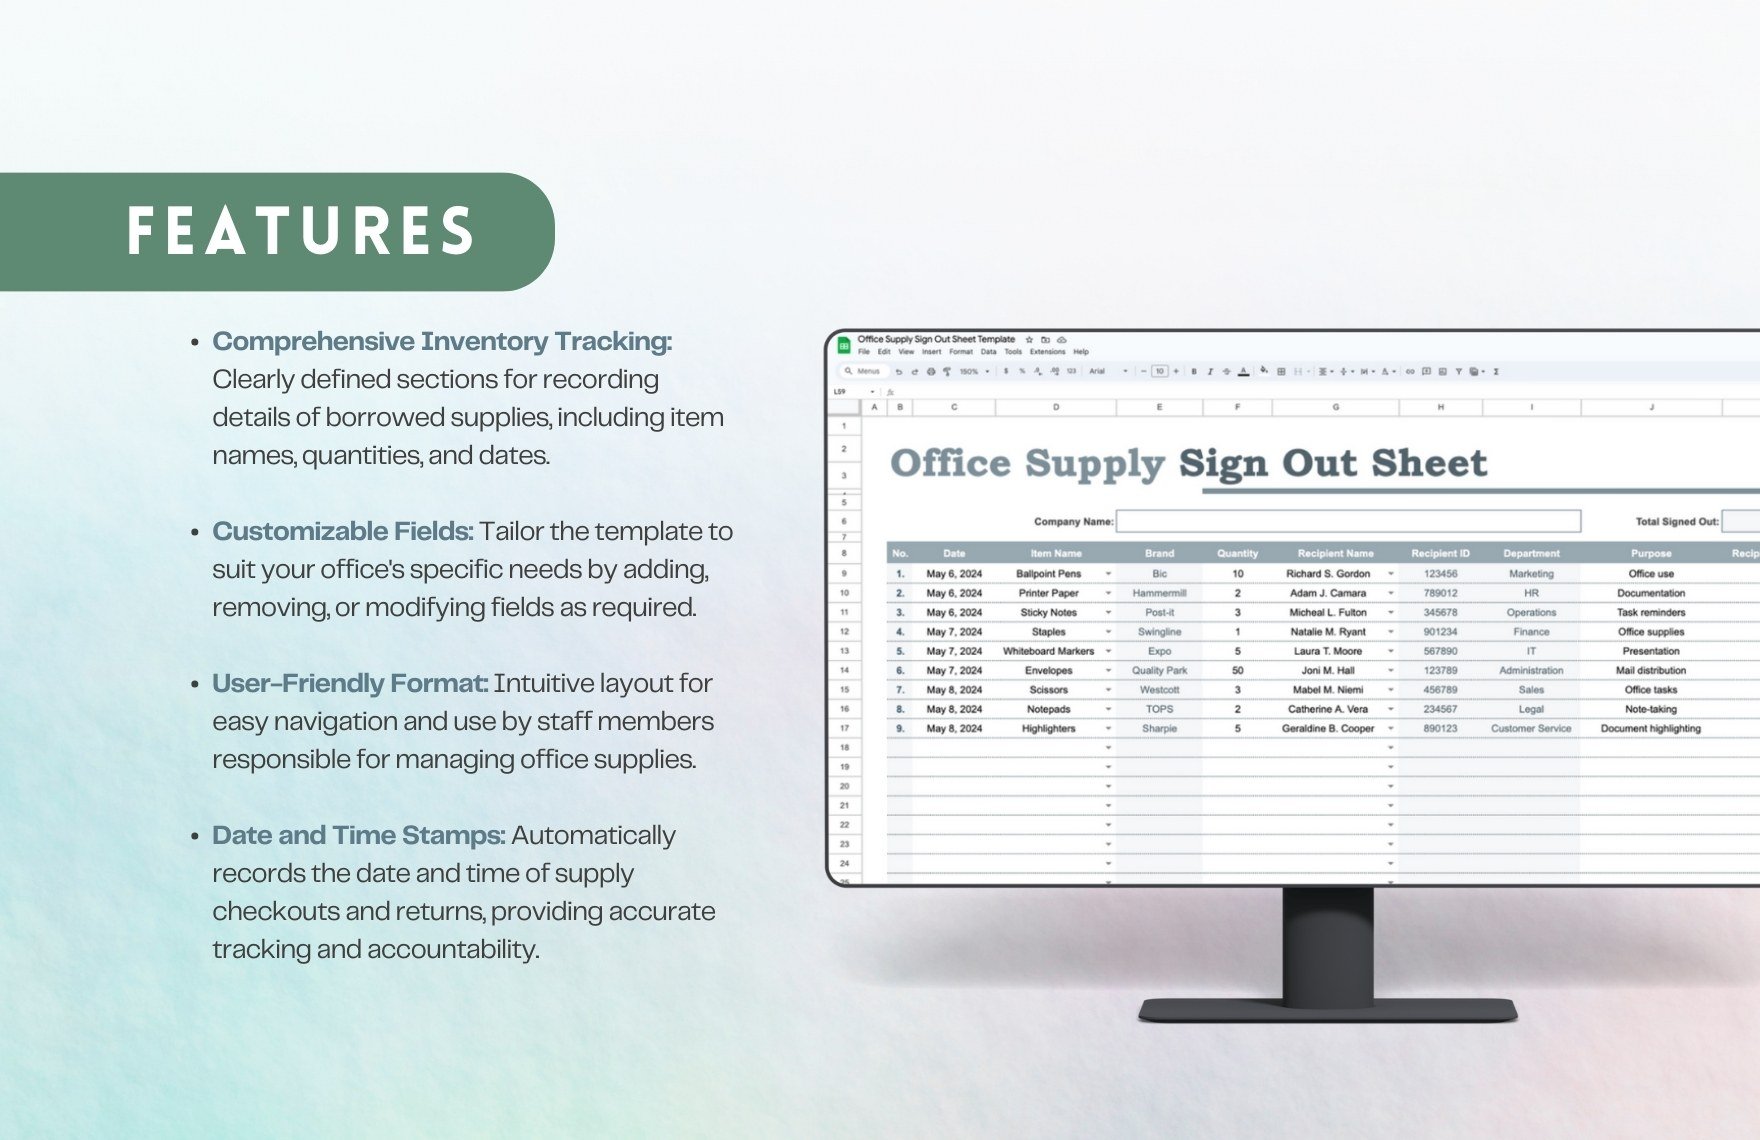 Office Supply Sign Out Sheet Template